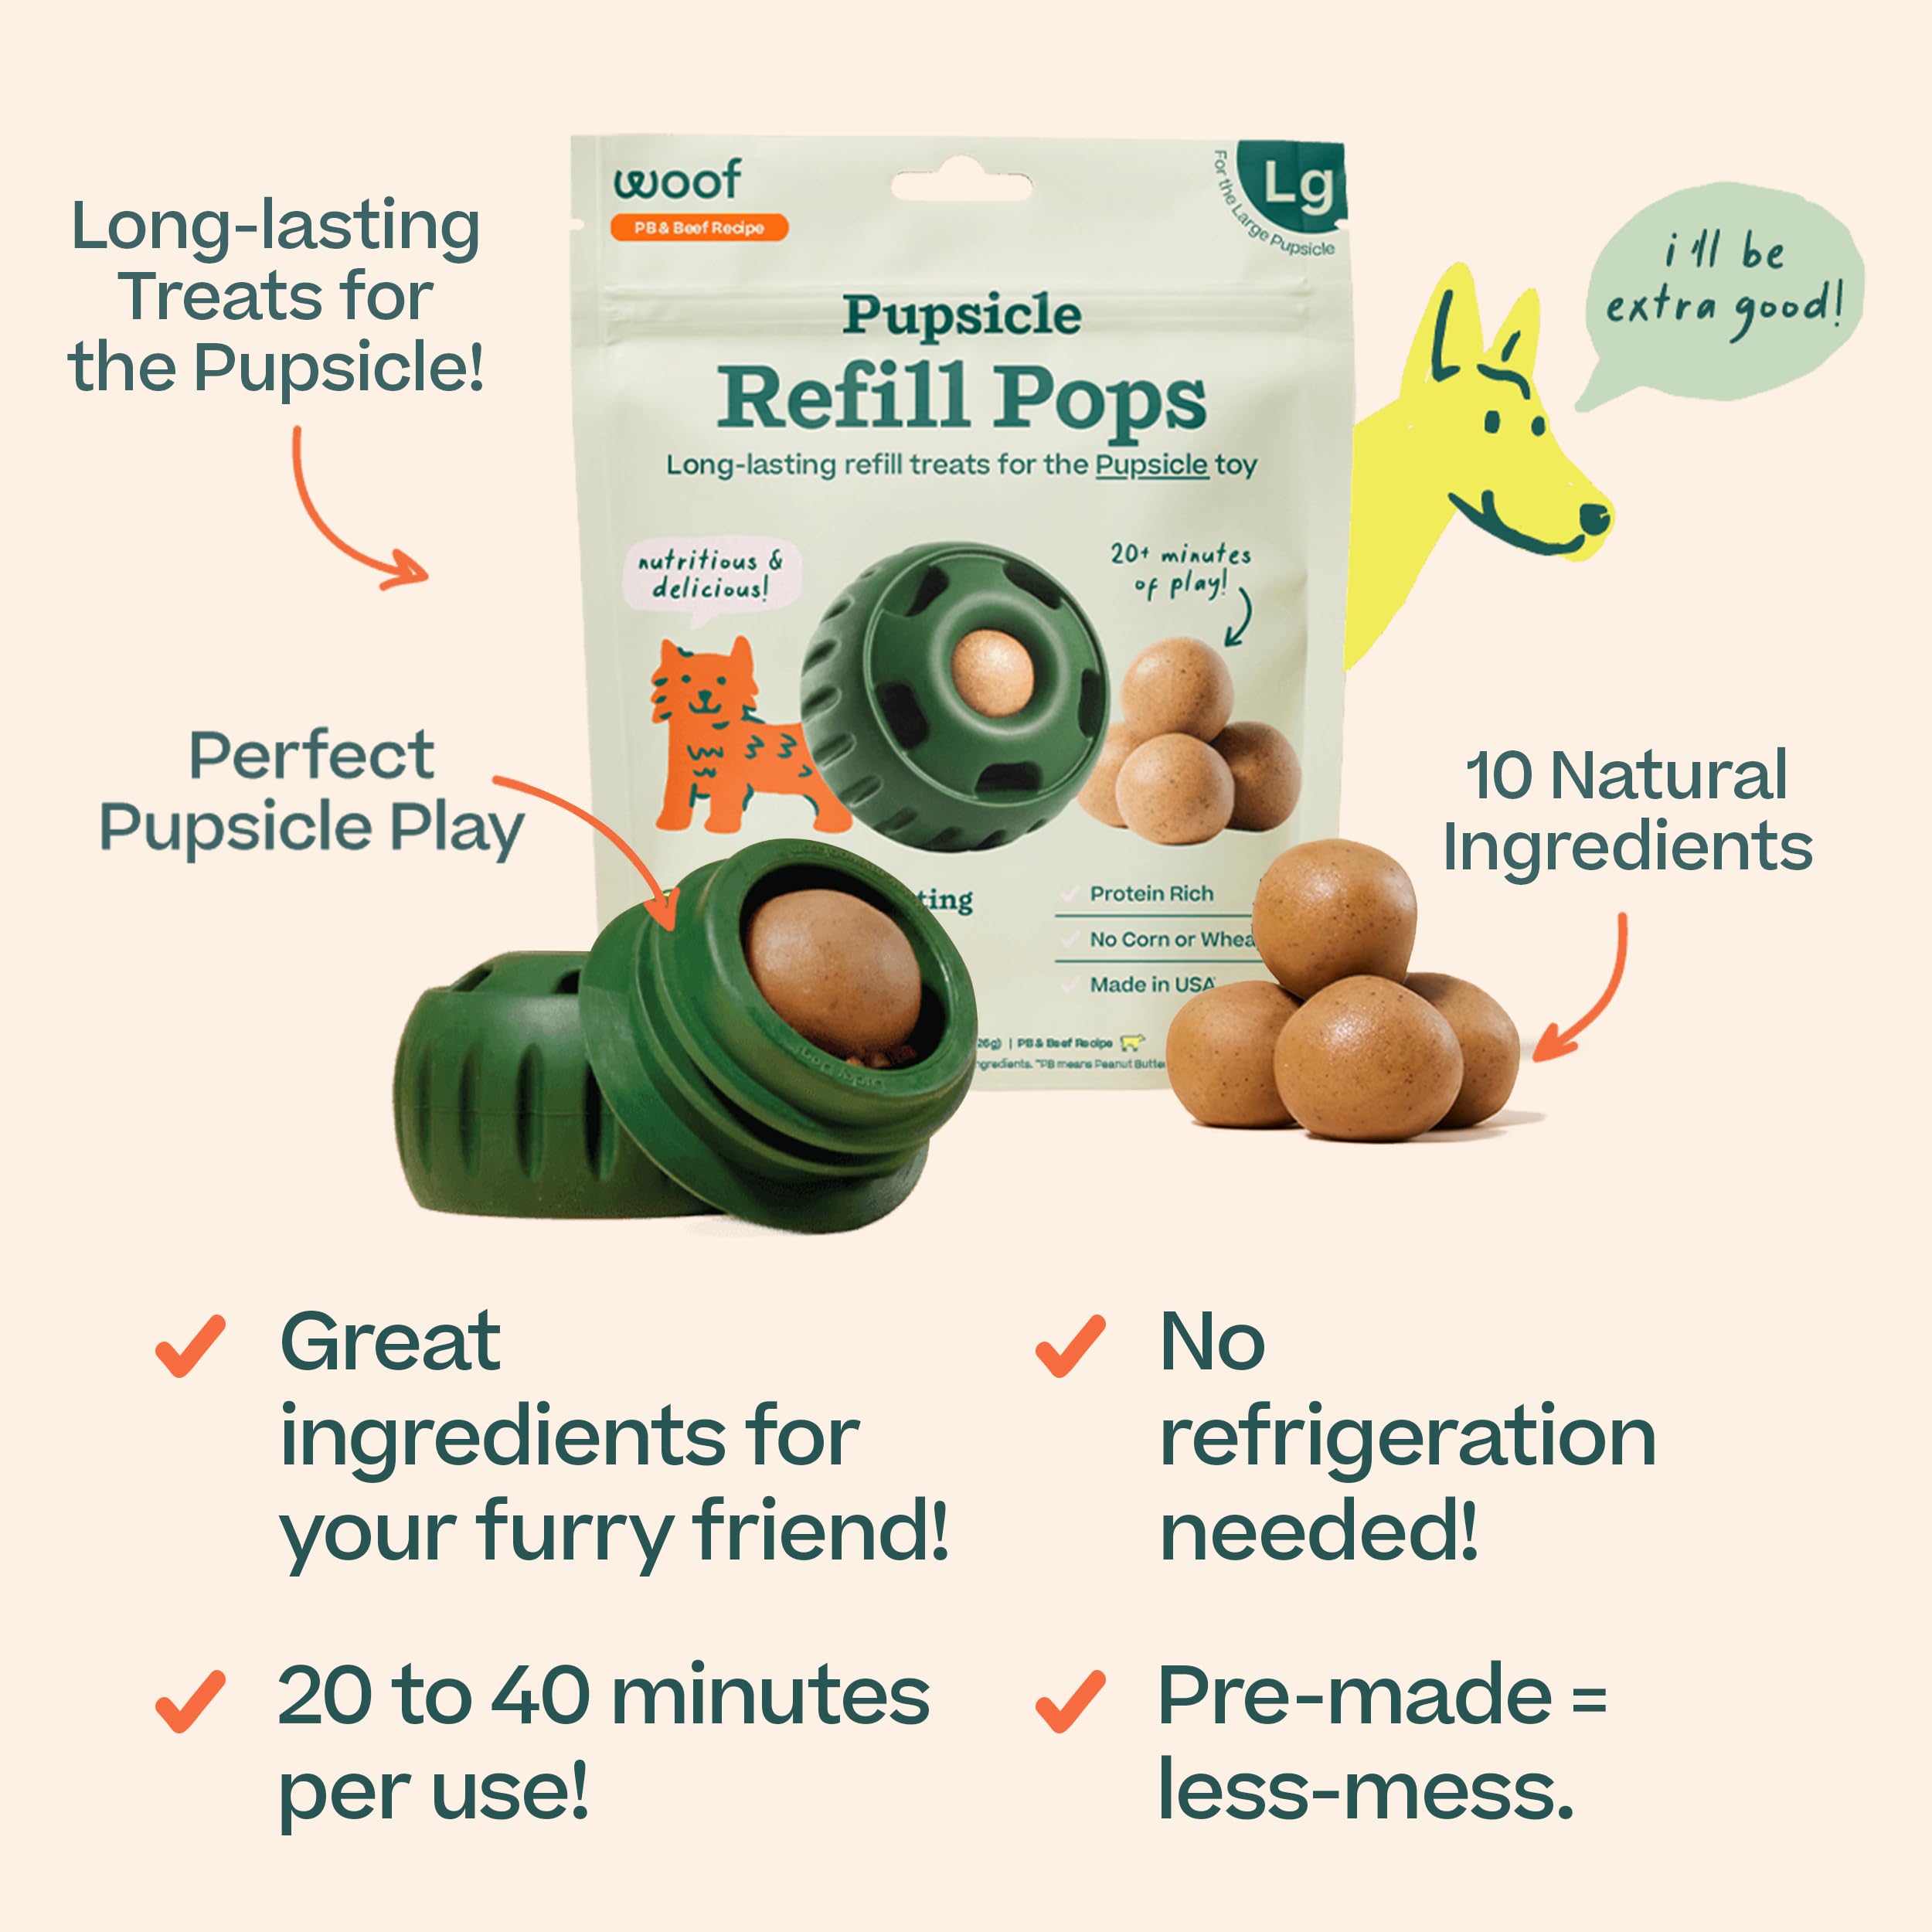 WOOF Pupsicle Pops, Delicious Long Lasting Dog Treats, Refills for The Pupsicle, Pre-Made Refill Treats for Dogs, Natural Ingredients, Low-Mess Beef Pet Treats - Large Pops - 7 Count